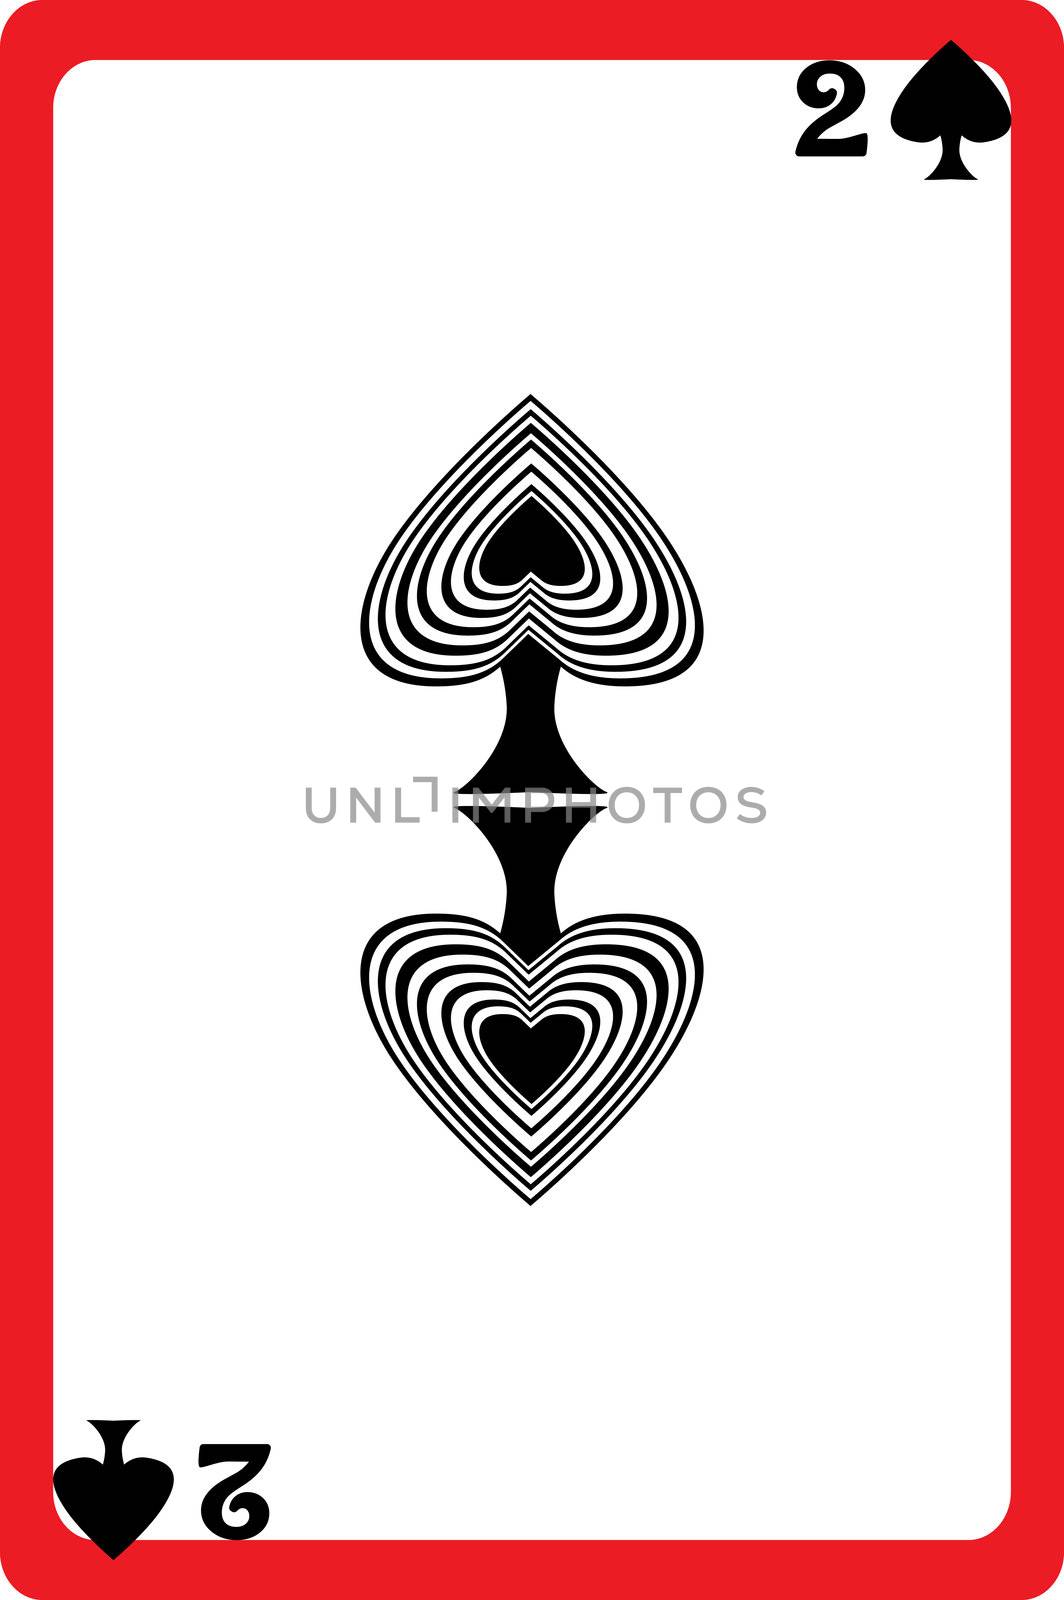 Scale hand drawn illustration of a playing card representing the two of spades, one element of a deck